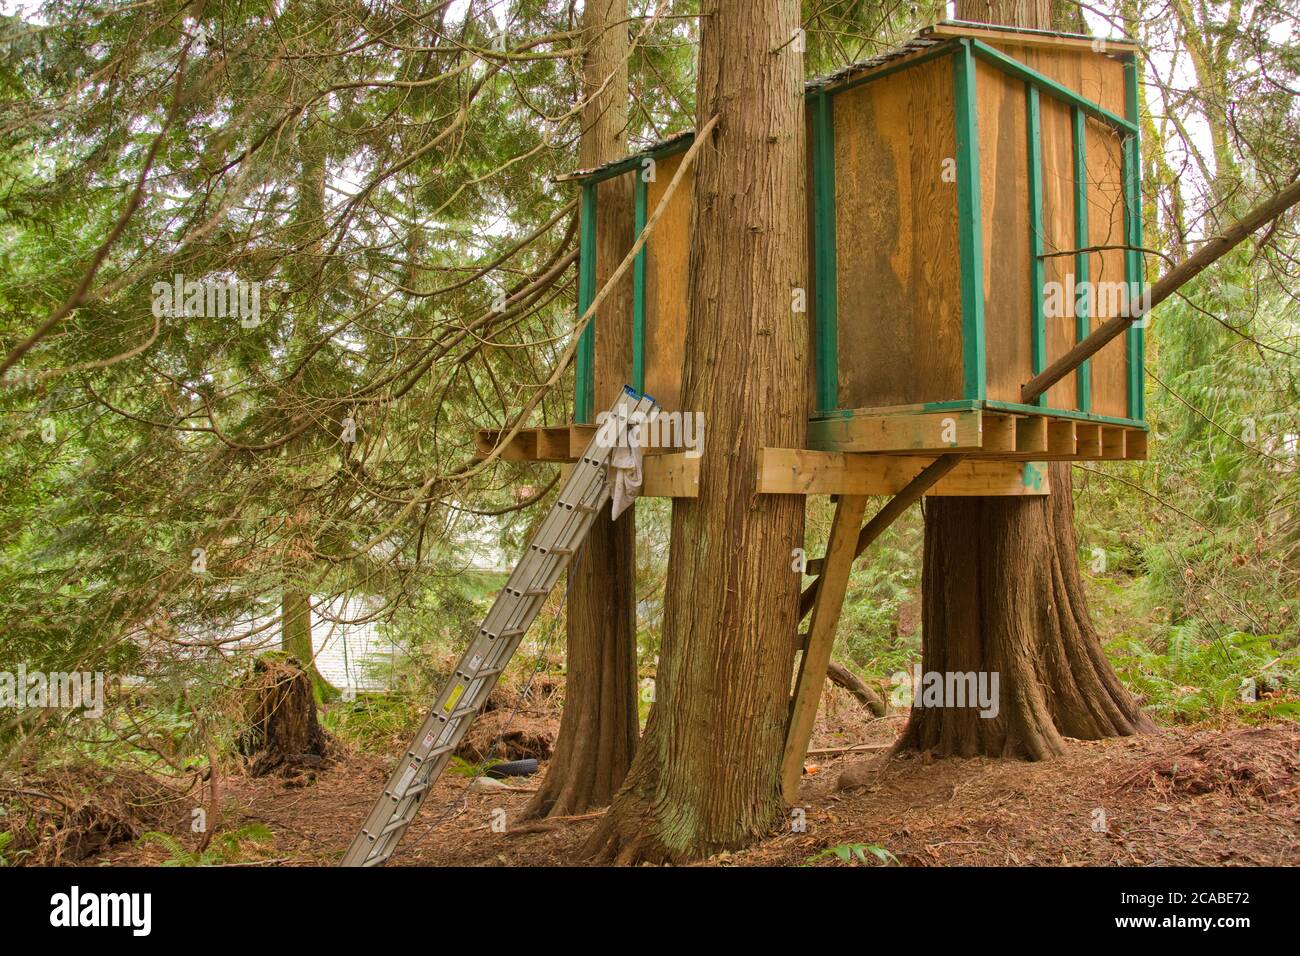 Treehouse in woods on rural property with ladder going up to it in Issaquah, Washington, USA Stock Photo